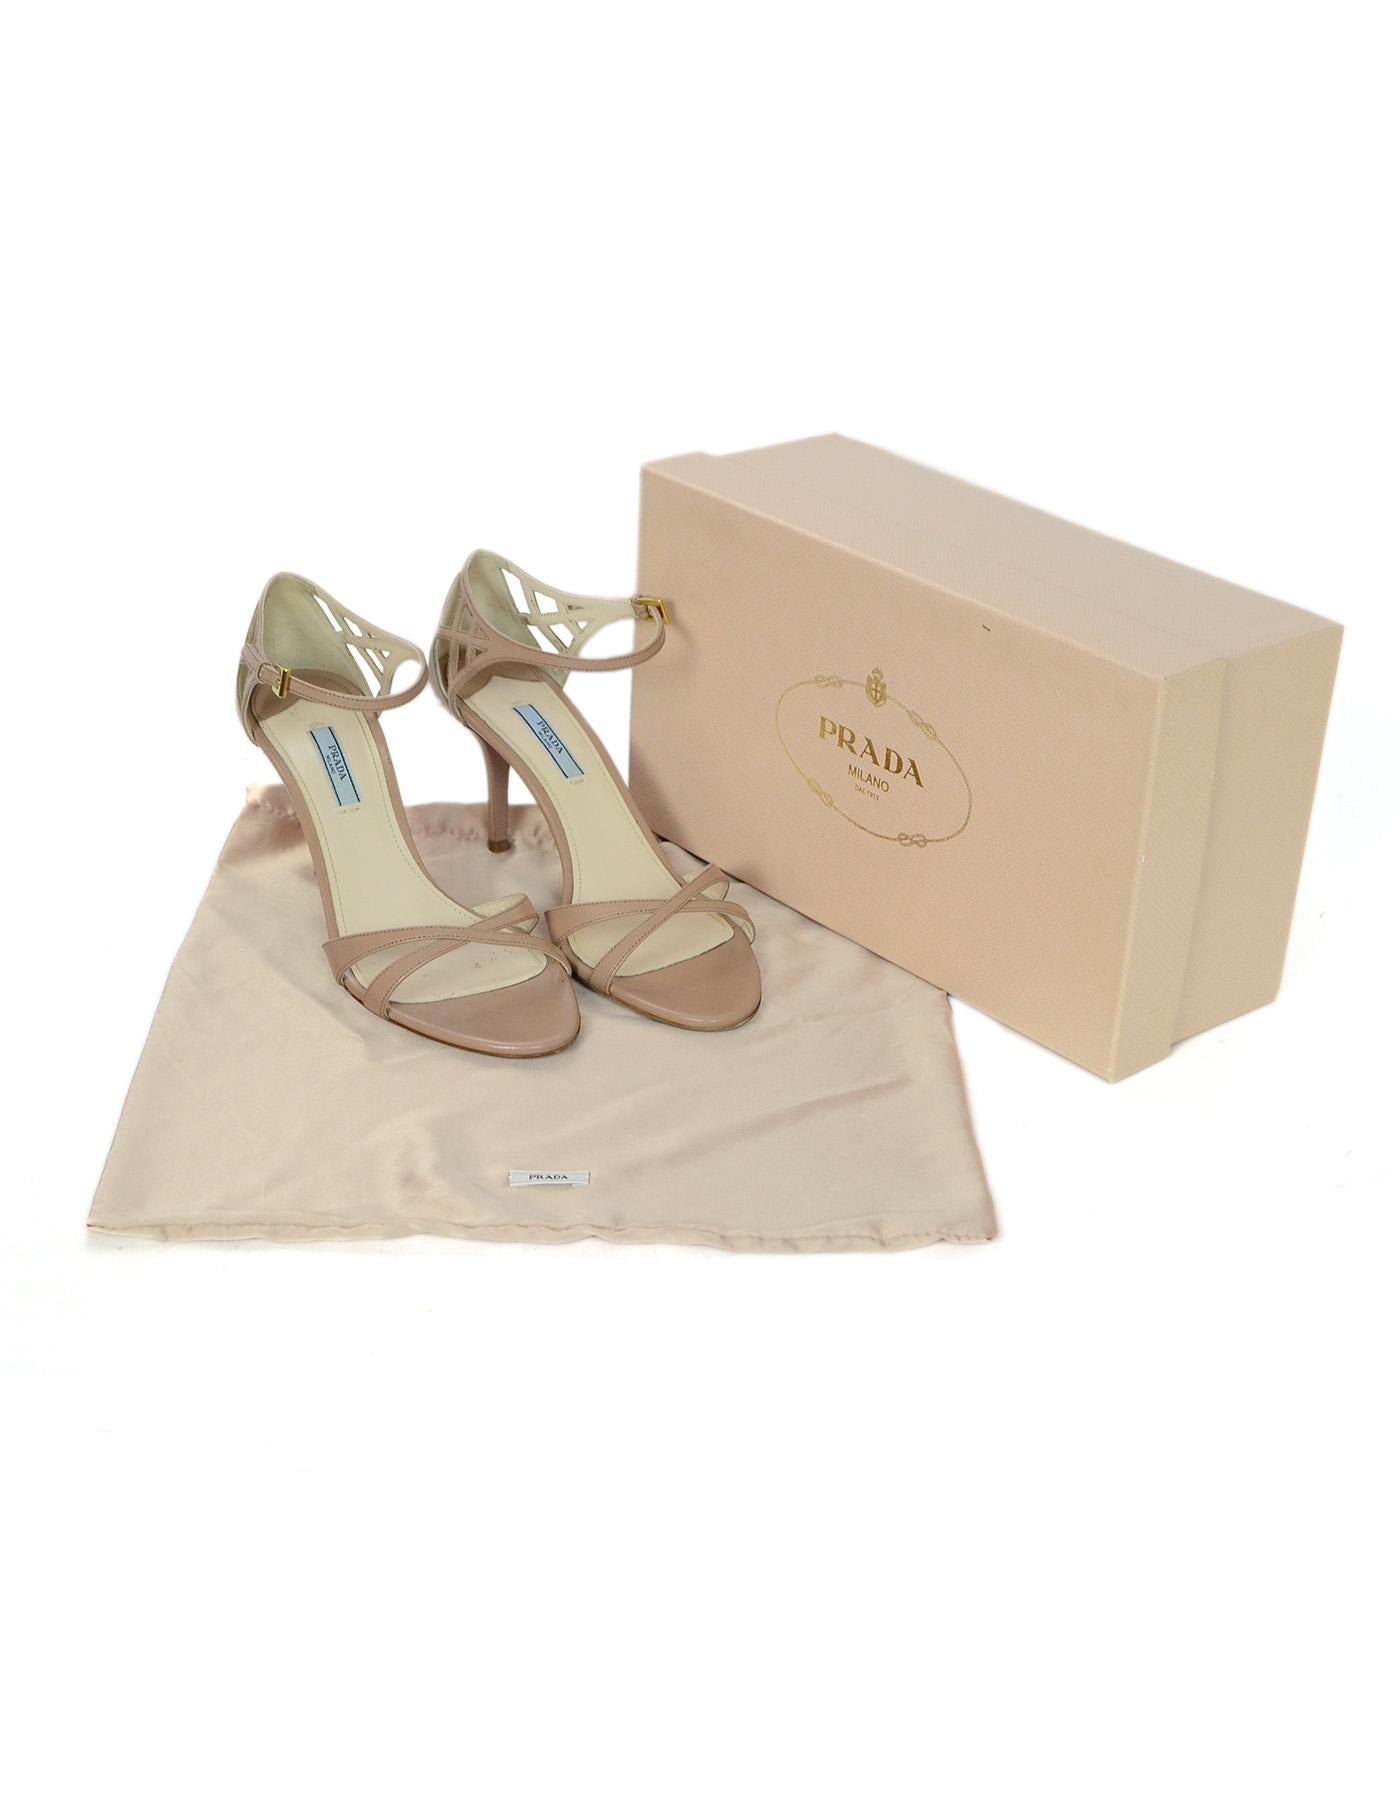 Prada Nude Leather Strappy High Heel Sandals Sz 40.5 W/ Box & Dust Bag

Made In: Italy
Color: Nude
Hardware: Goldtone
Materials: Leather
Closure/Opening: Strap with belt closure at side
Overall Condition: Excellent pre-owned condition with exception